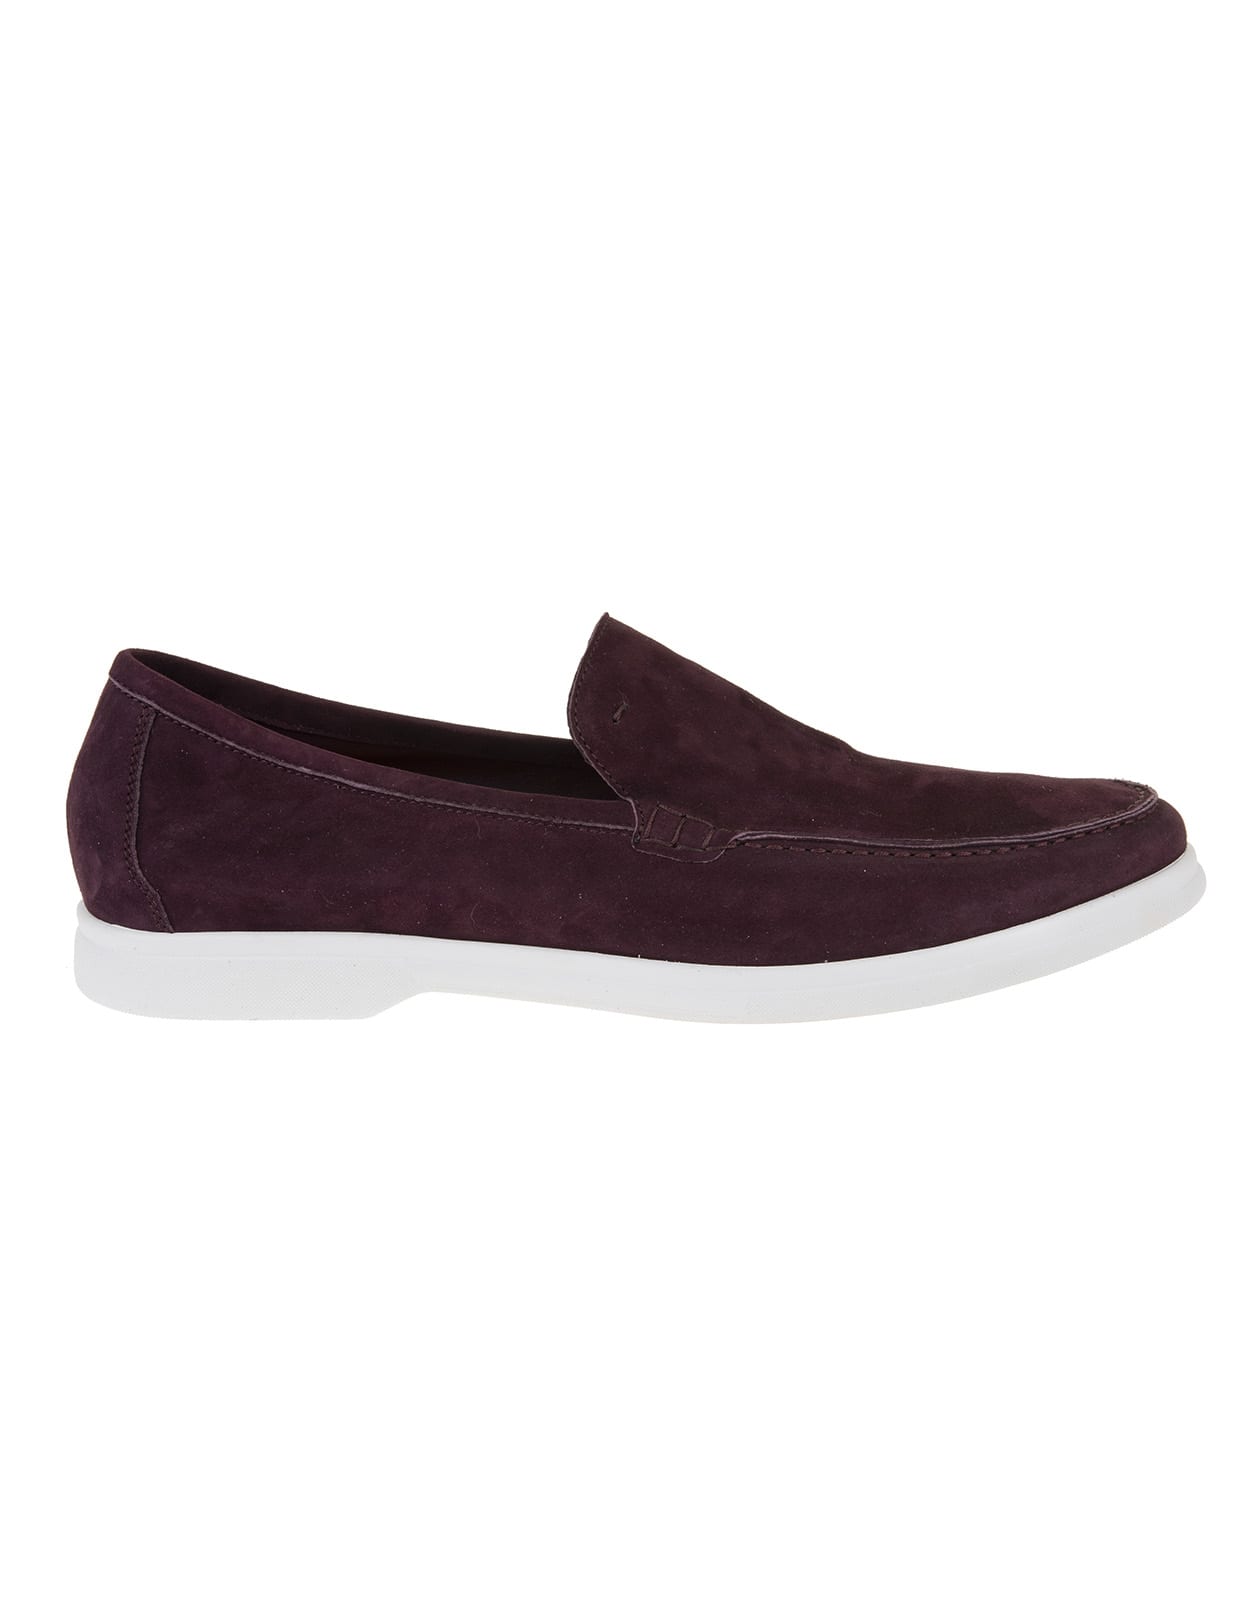 Andrea Ventura Man Burgundy Suede Loafer With White Latex Sole